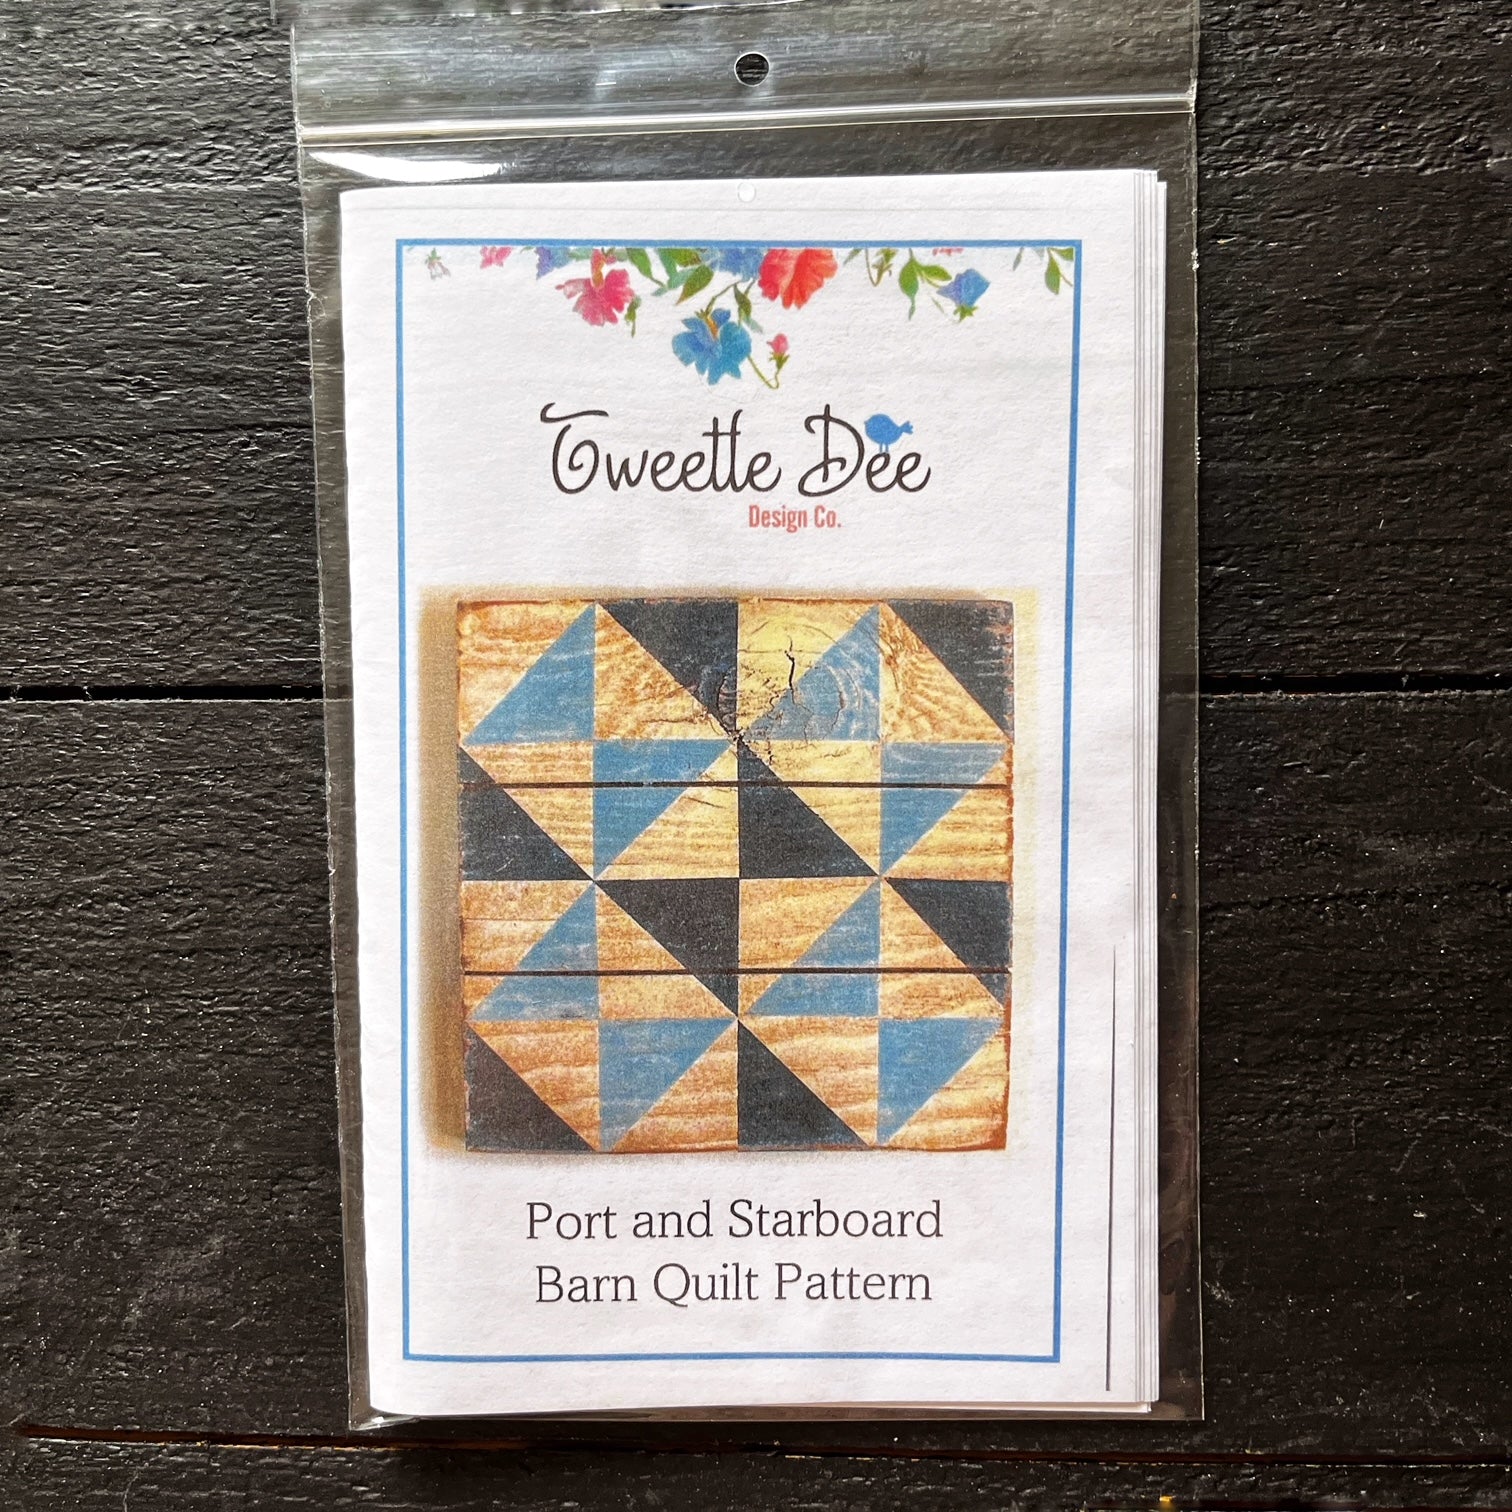 Port and Starboard Barn Quilt Pattern